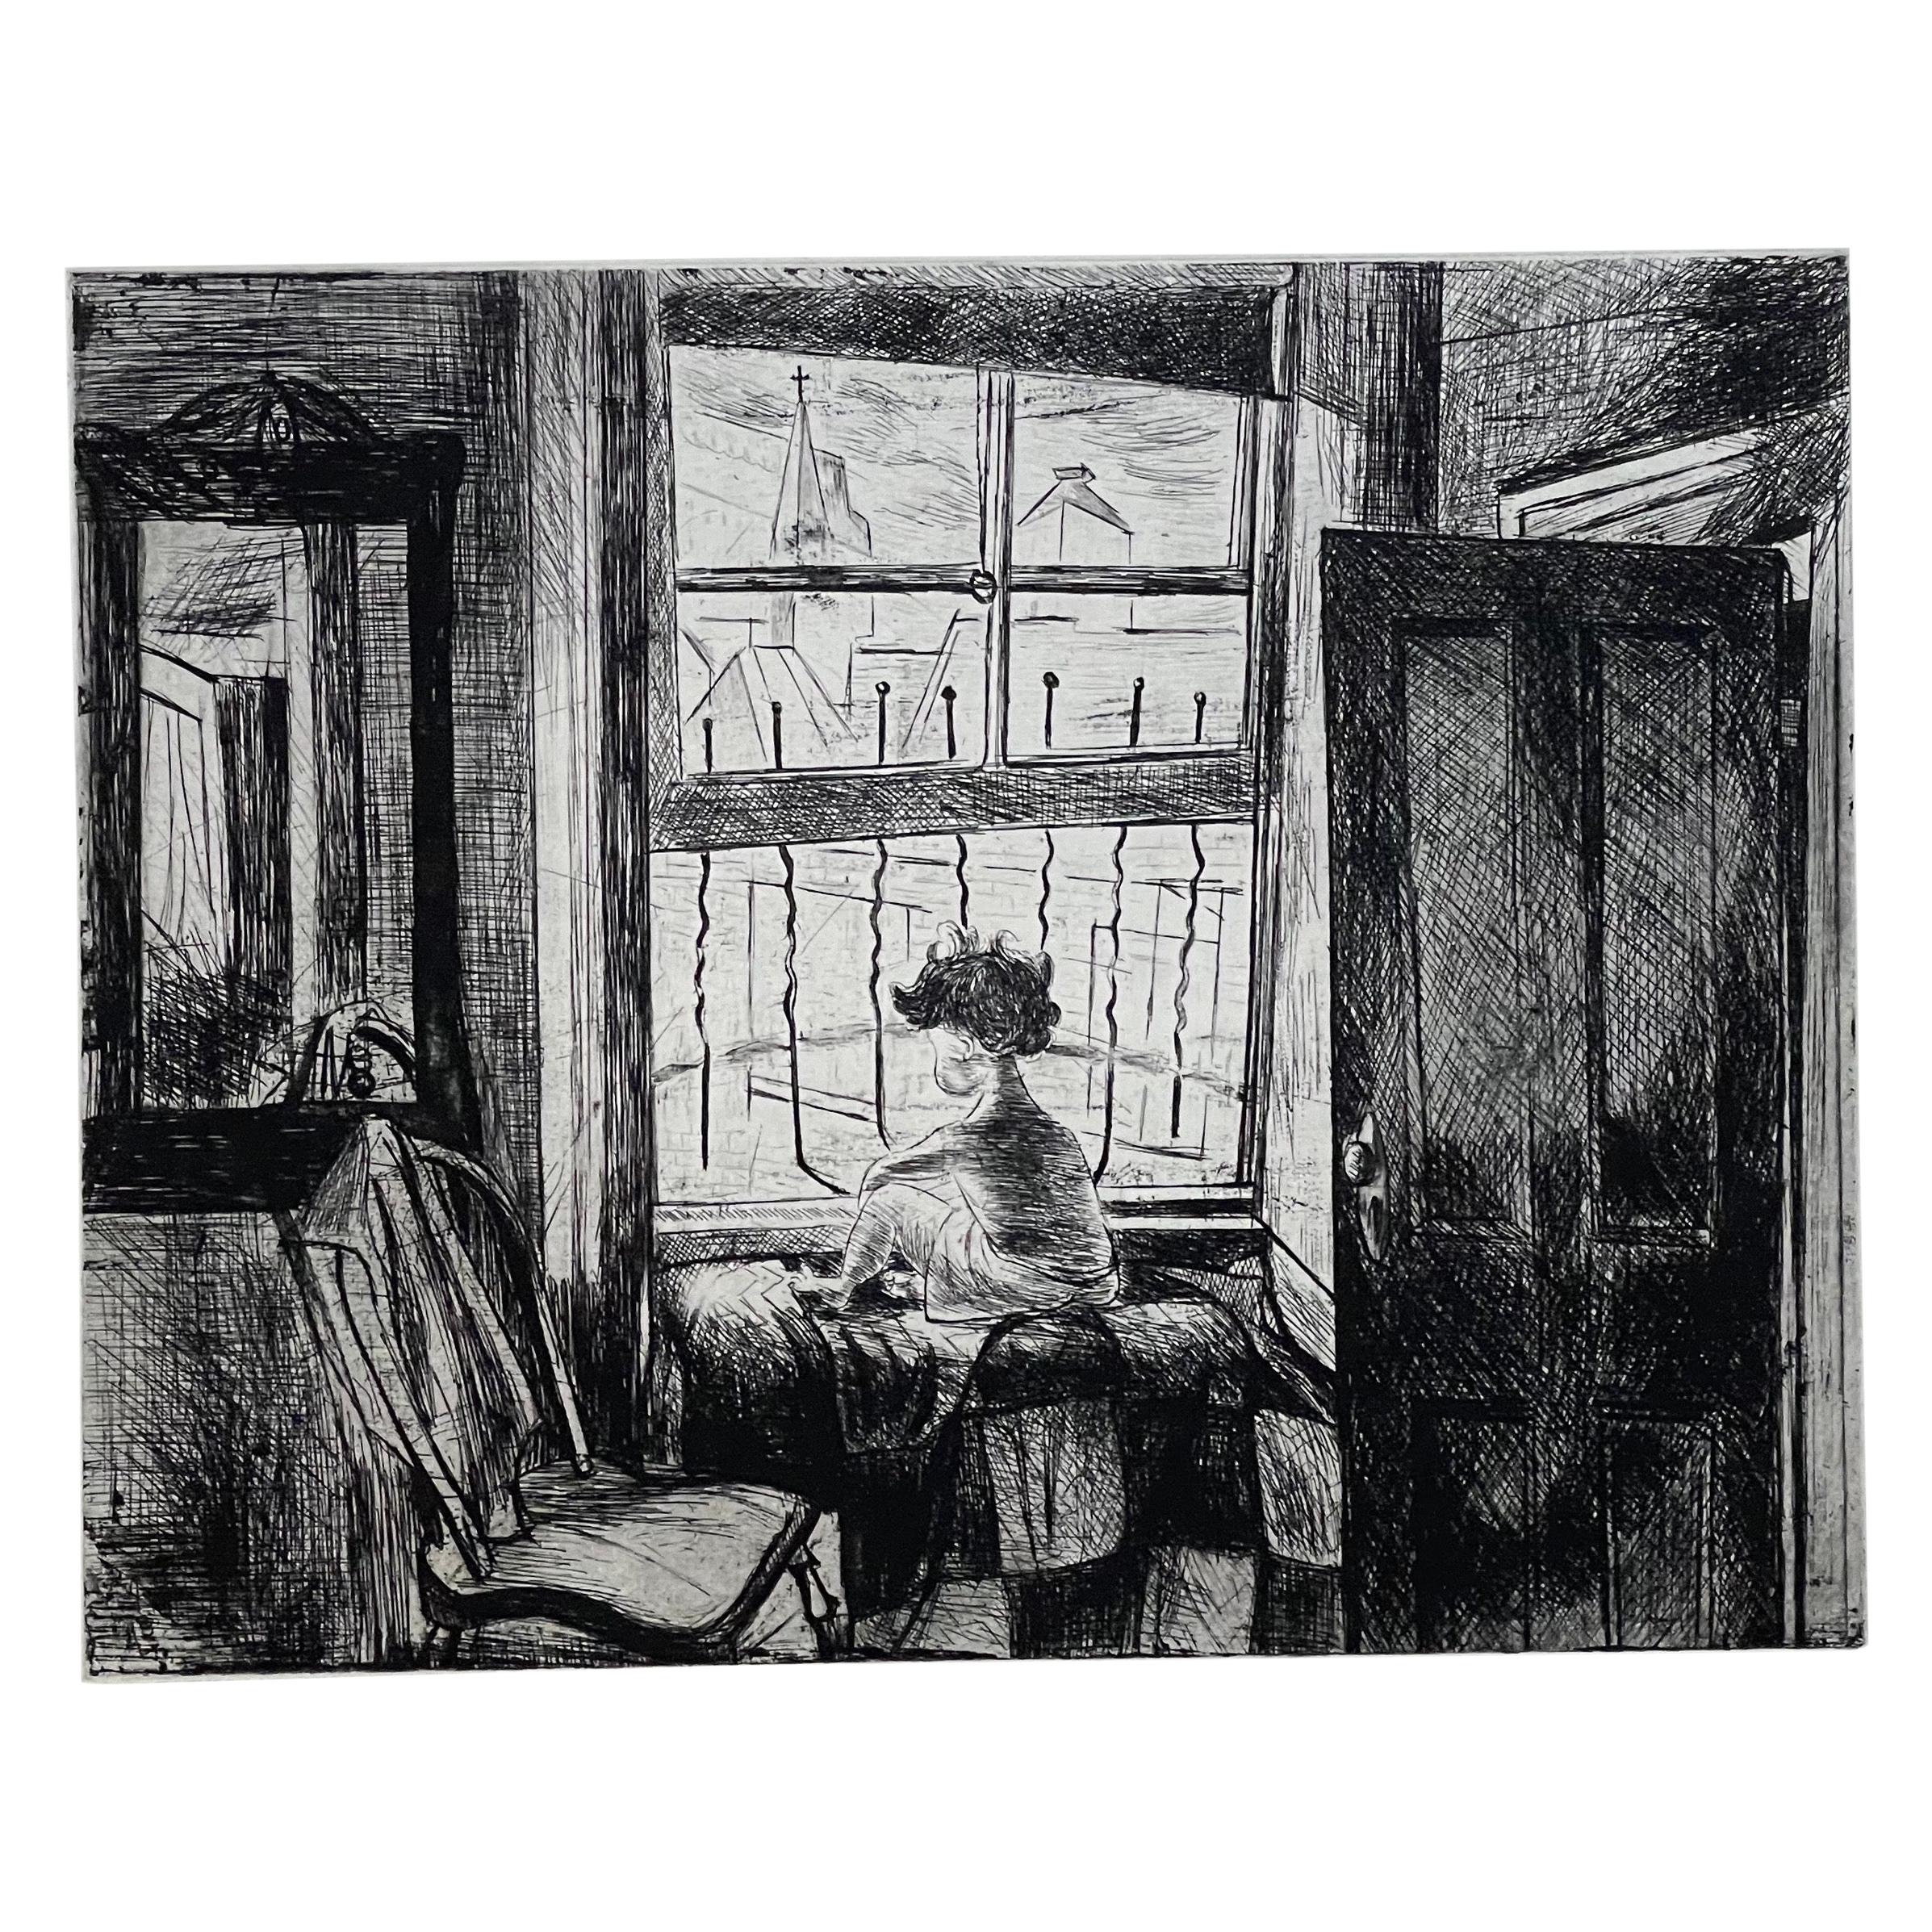 Images of Children Etching Entitled "City Child" by Will Barnet